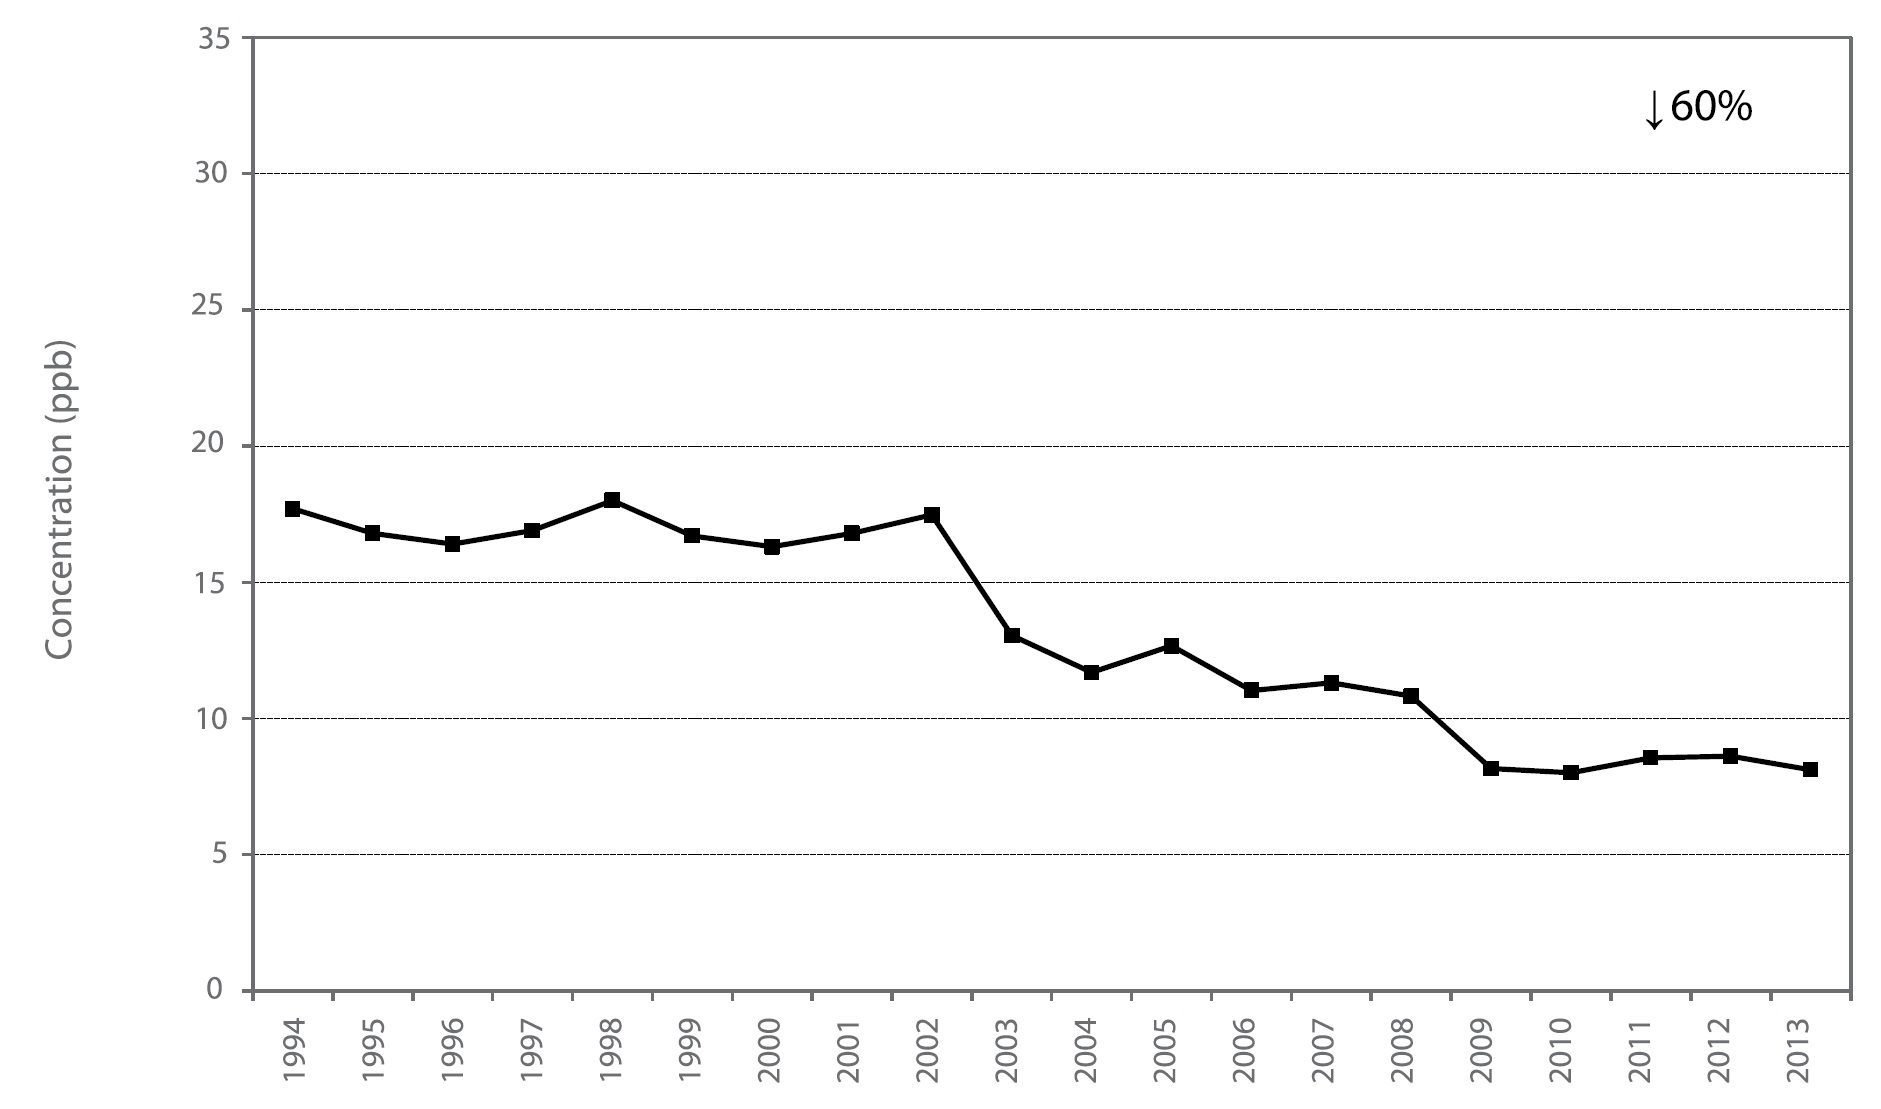 Figure A28 is a line chart displaying the nitrogen dioxide annual mean at Sarnia from 1994 to 2013. Over this 20-year period, nitrogen dioxide decreased 60%.